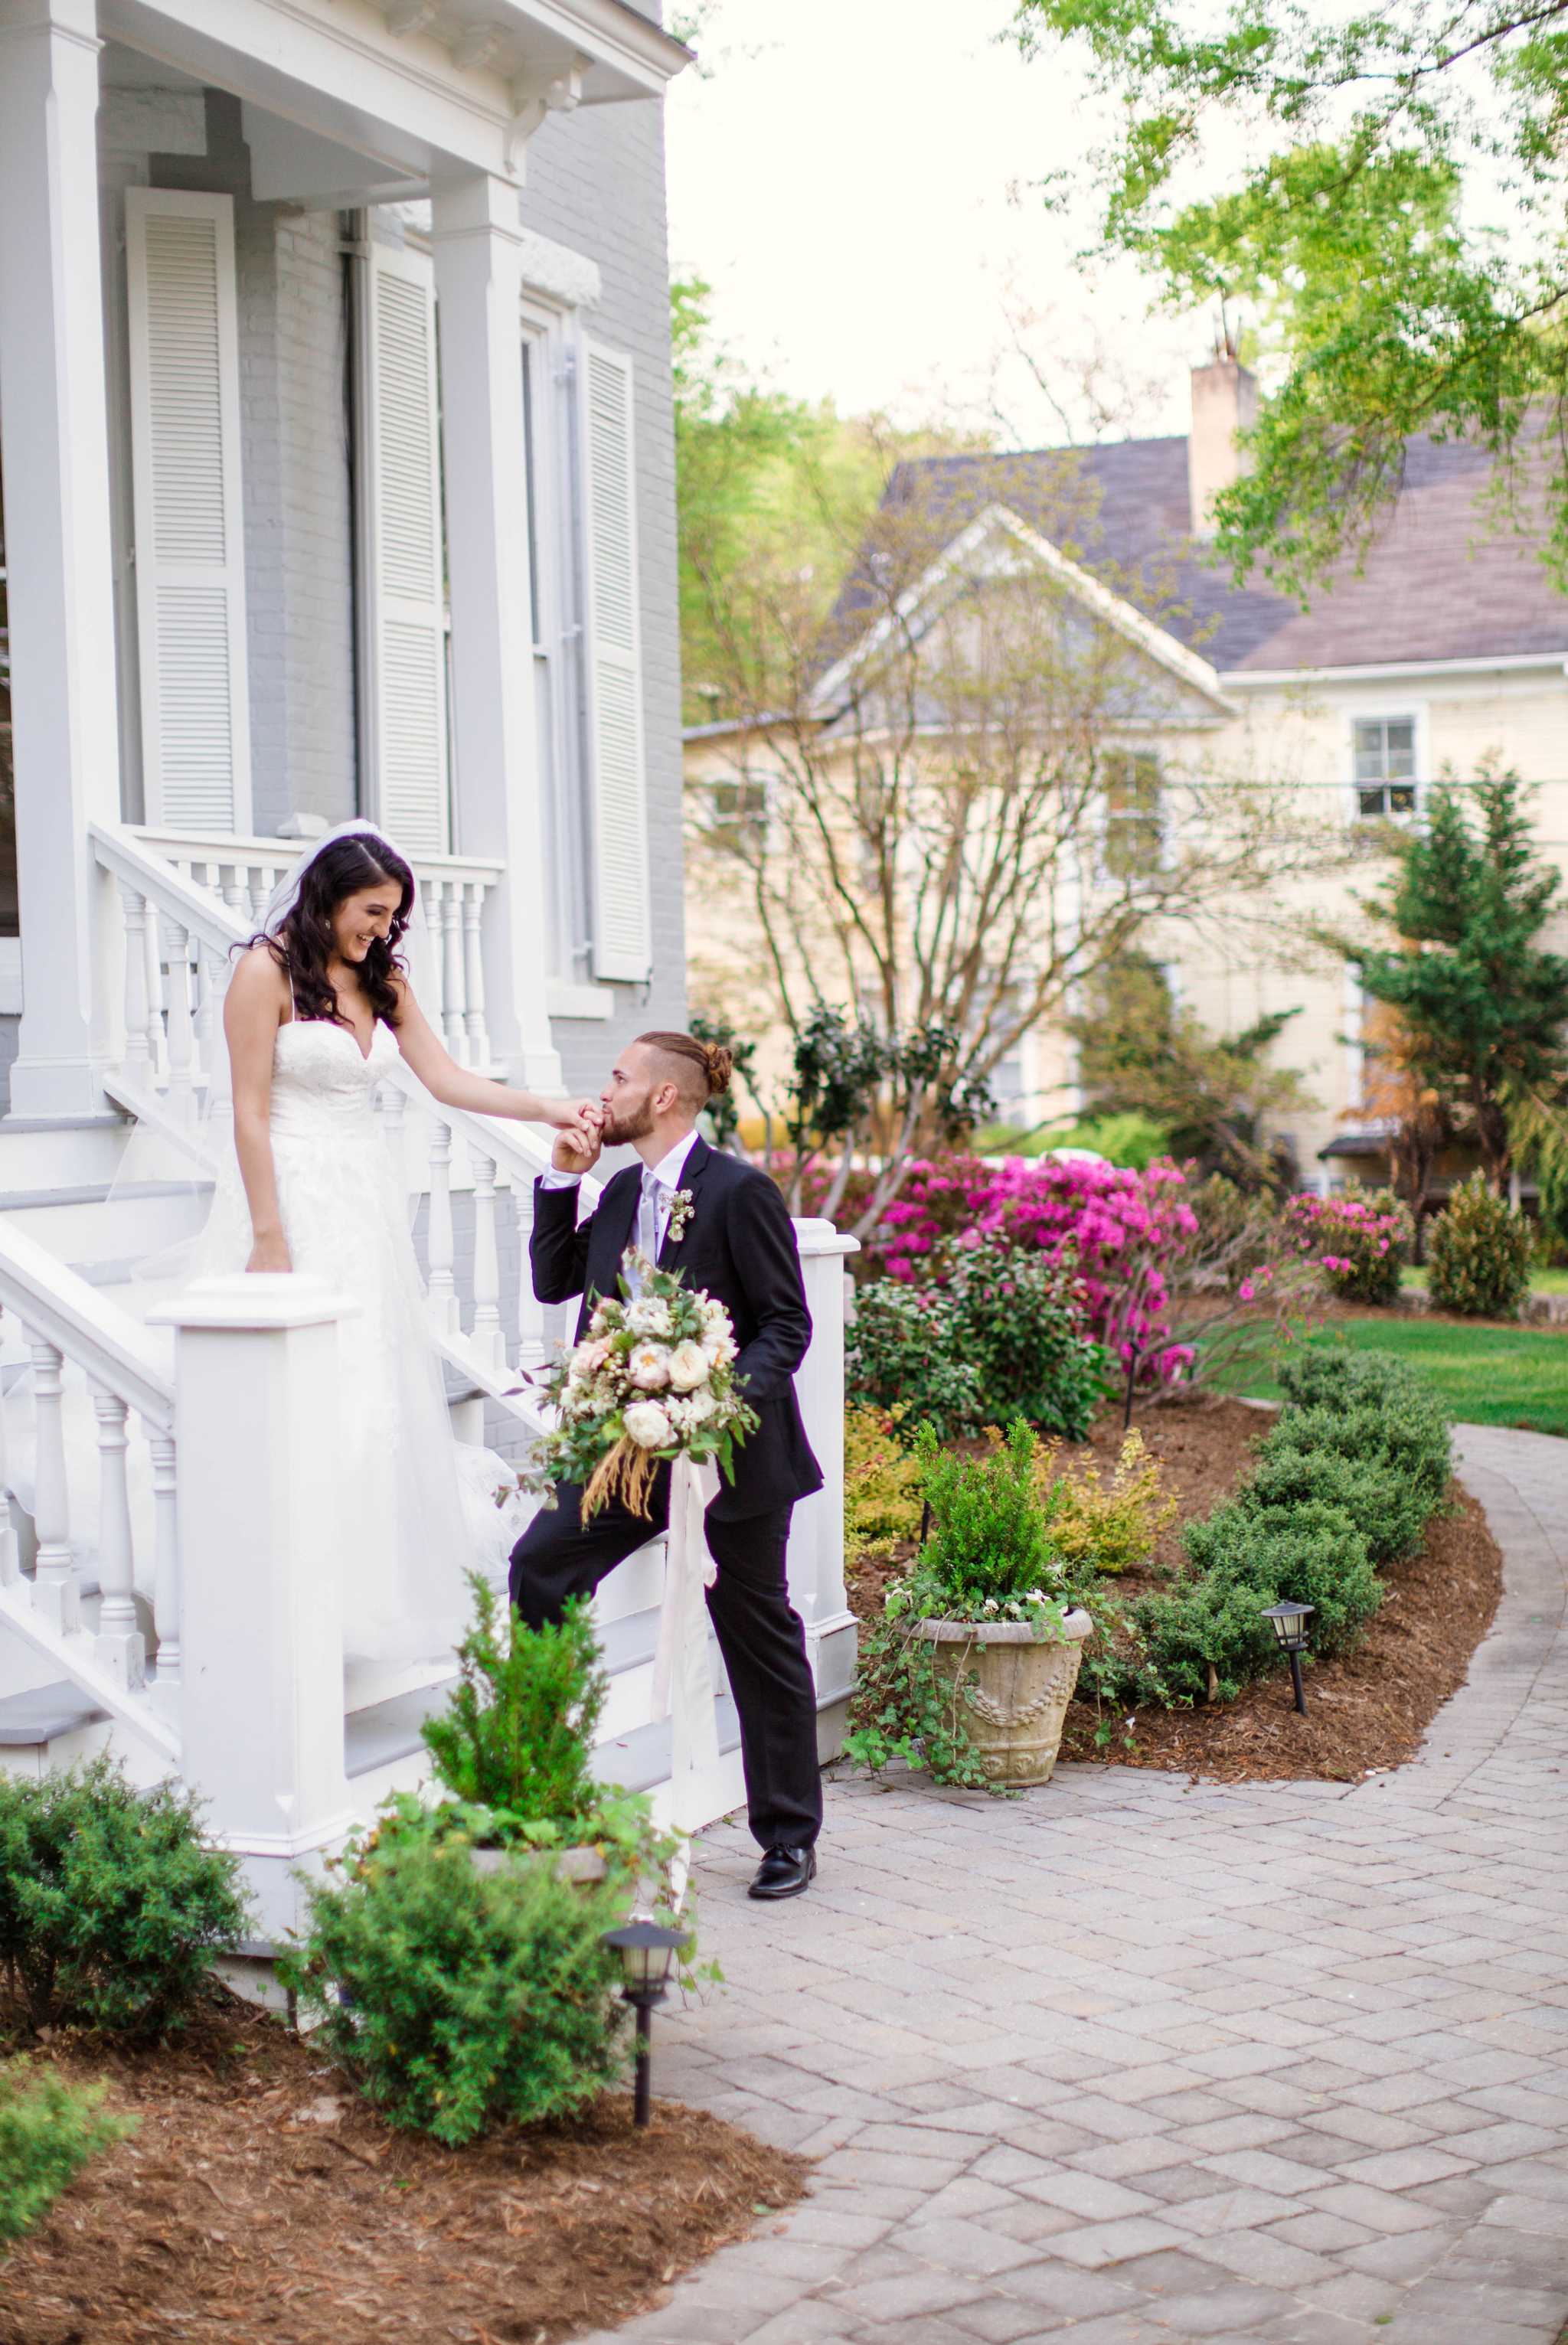  Groom kissing his brides hand  - Wedding Portraits on the front porch of an all white luxury estate mansion - Bride is wearing a Aline Ballgown by Cherish by Southern Bride with a long cathedral veil - Groom is wearing a black suit by Generation Tux